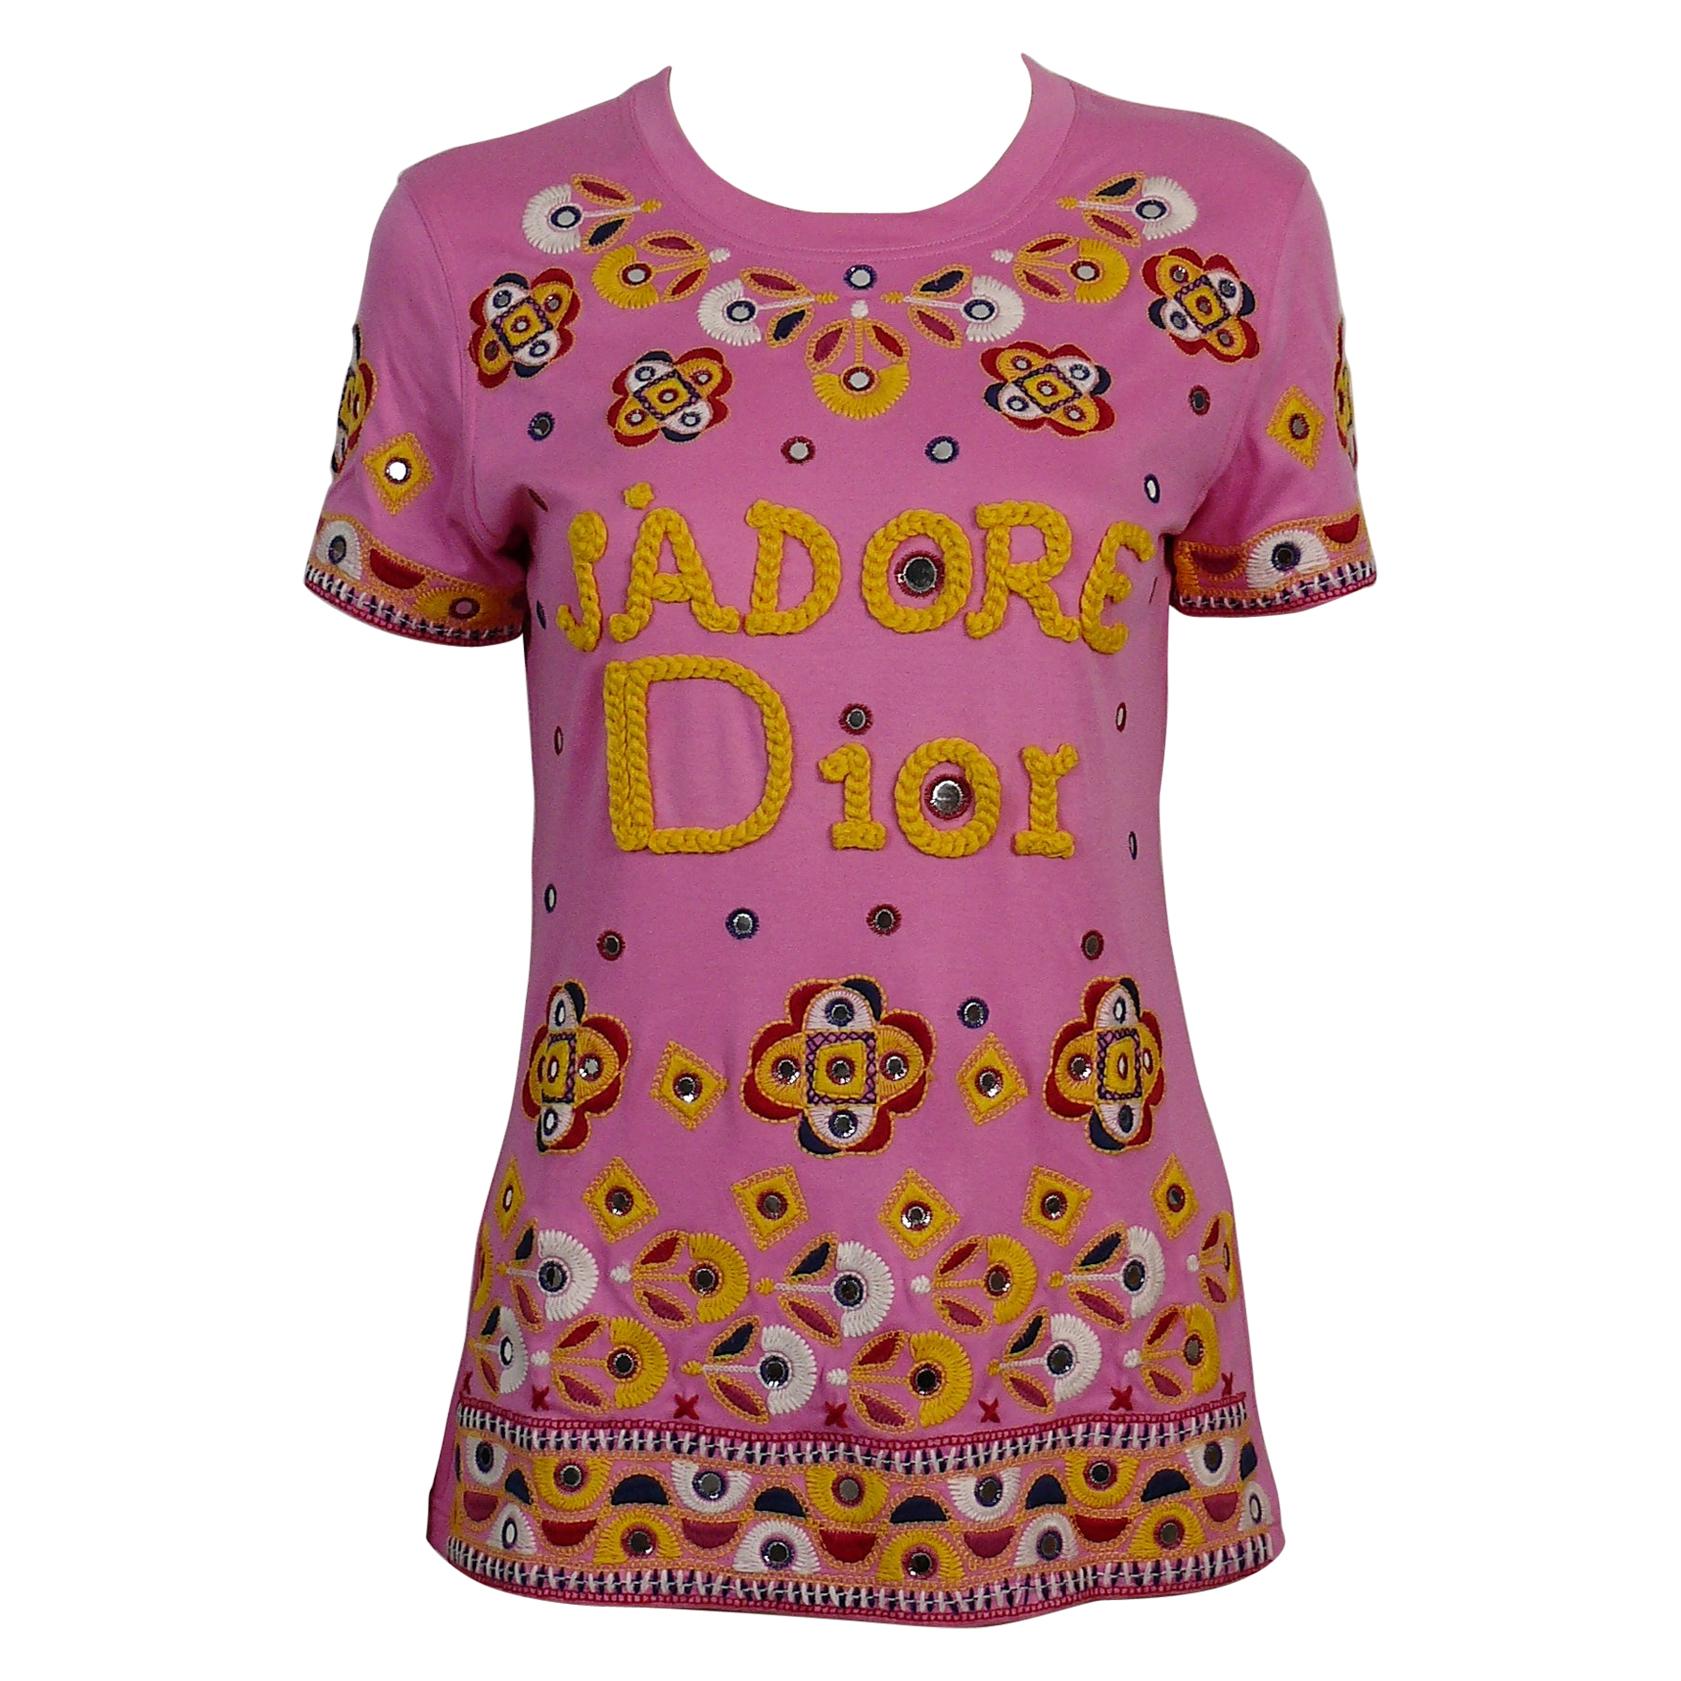 Christian Dior J'adore Dior Embroidered T-Shirt US Size 6